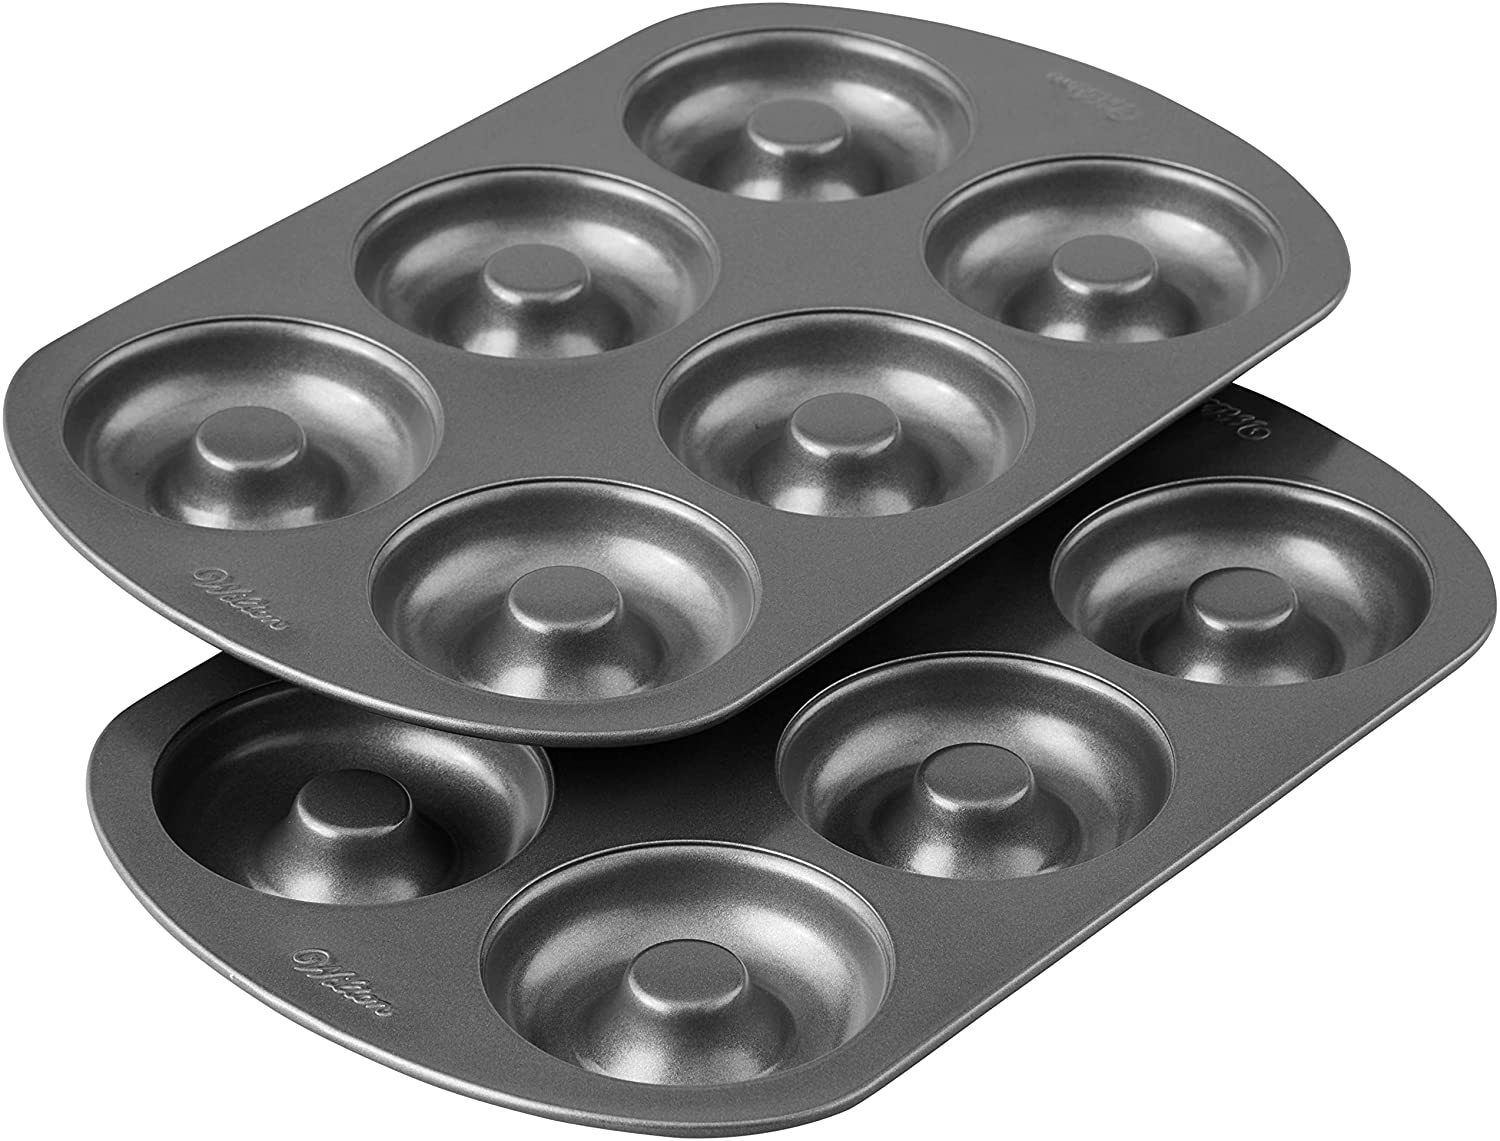 Mold ack Pans Kitchen Lightweight Portable Baking Tin Cake Non-stick Shell Shaped Tray Carbon Steel 12 Holes 